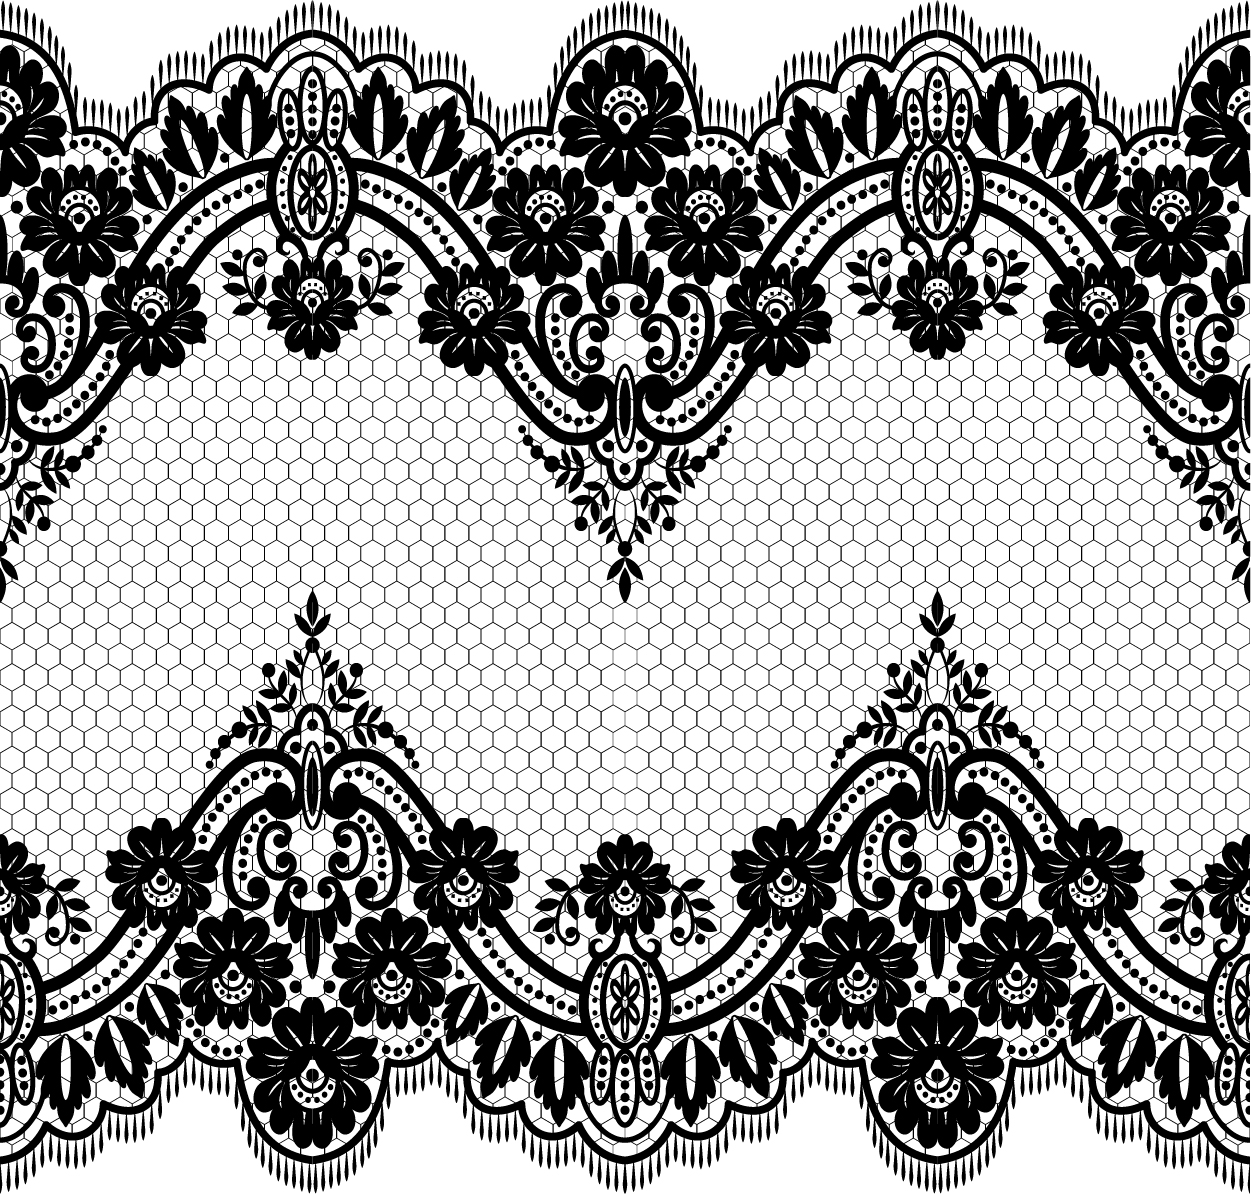 Download Lace seamless borders vectors set 06 free download